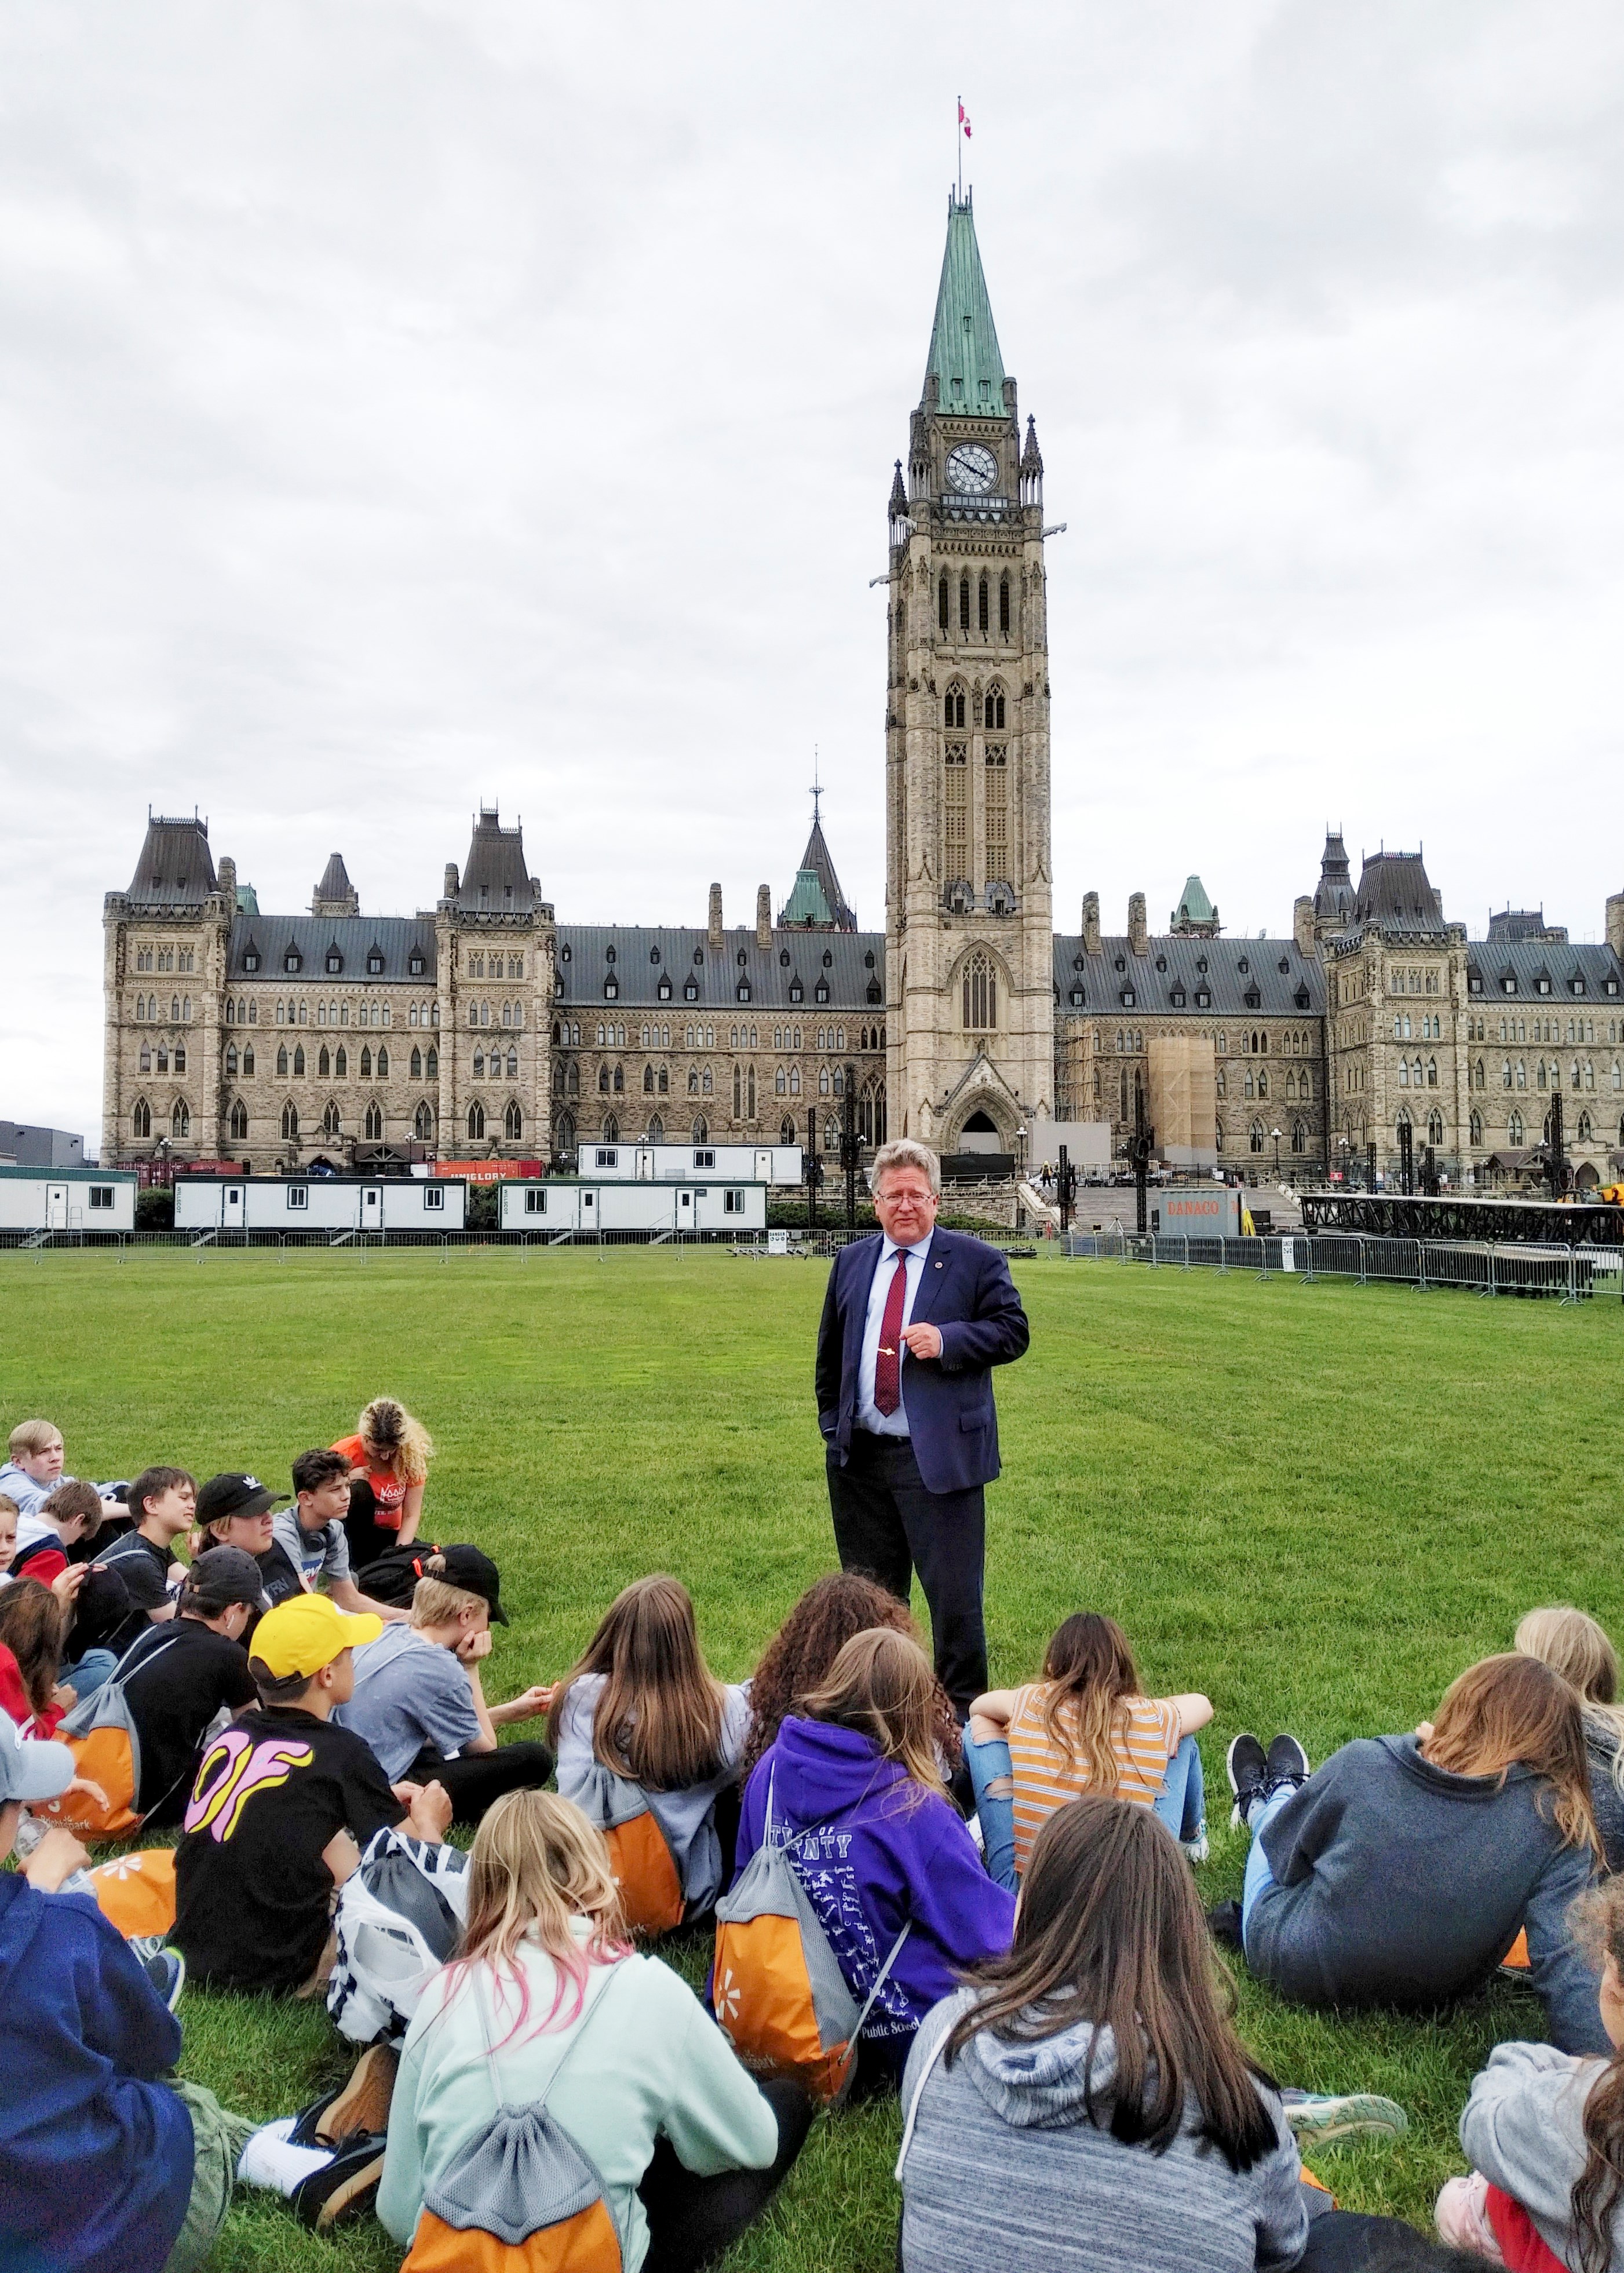 Thursday, June 13, 2019 — On the lawn of Parliament Hill, Senator Rob Black speaks to Grade 8 students from Island Lake Public School in Orangeville, Ontario, about the role of the Senate during their visit to Ottawa.